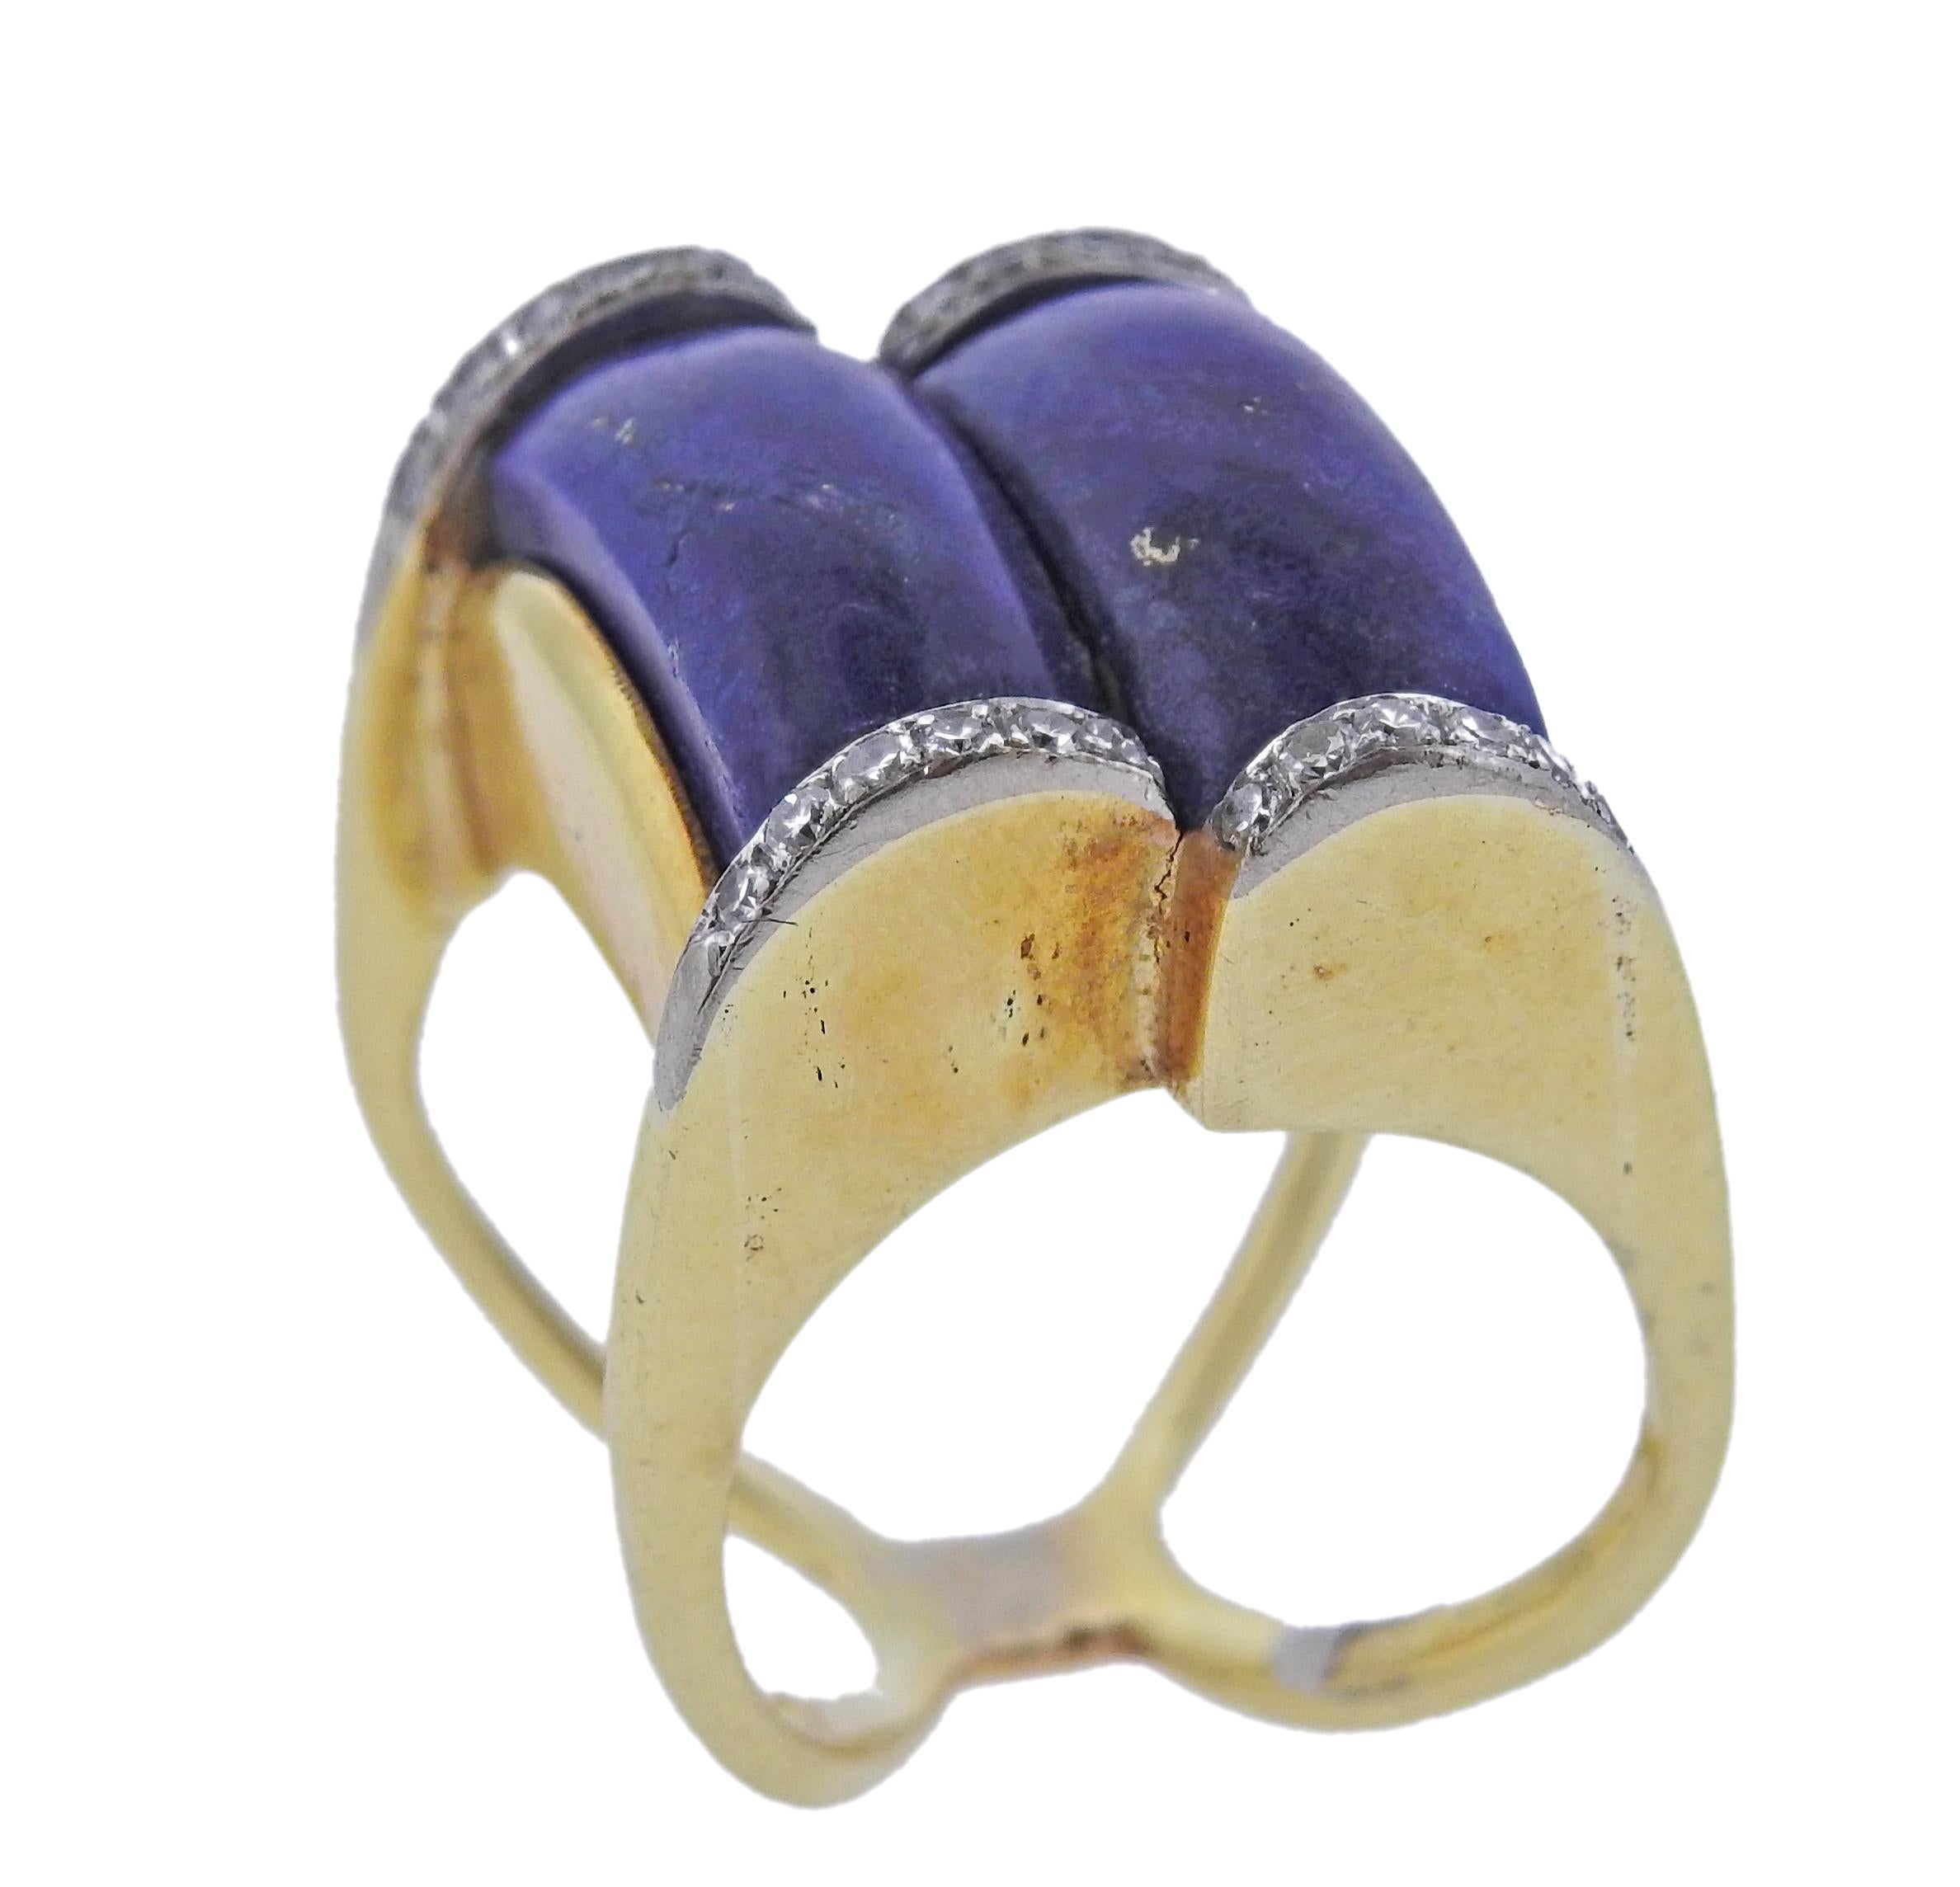 1970s vintage 18k gold ring with lapis and approx. 0.24ctw in diamonds. Ring size  6 (EU 54) top is 21mm wide . Weight 18.2 grams.